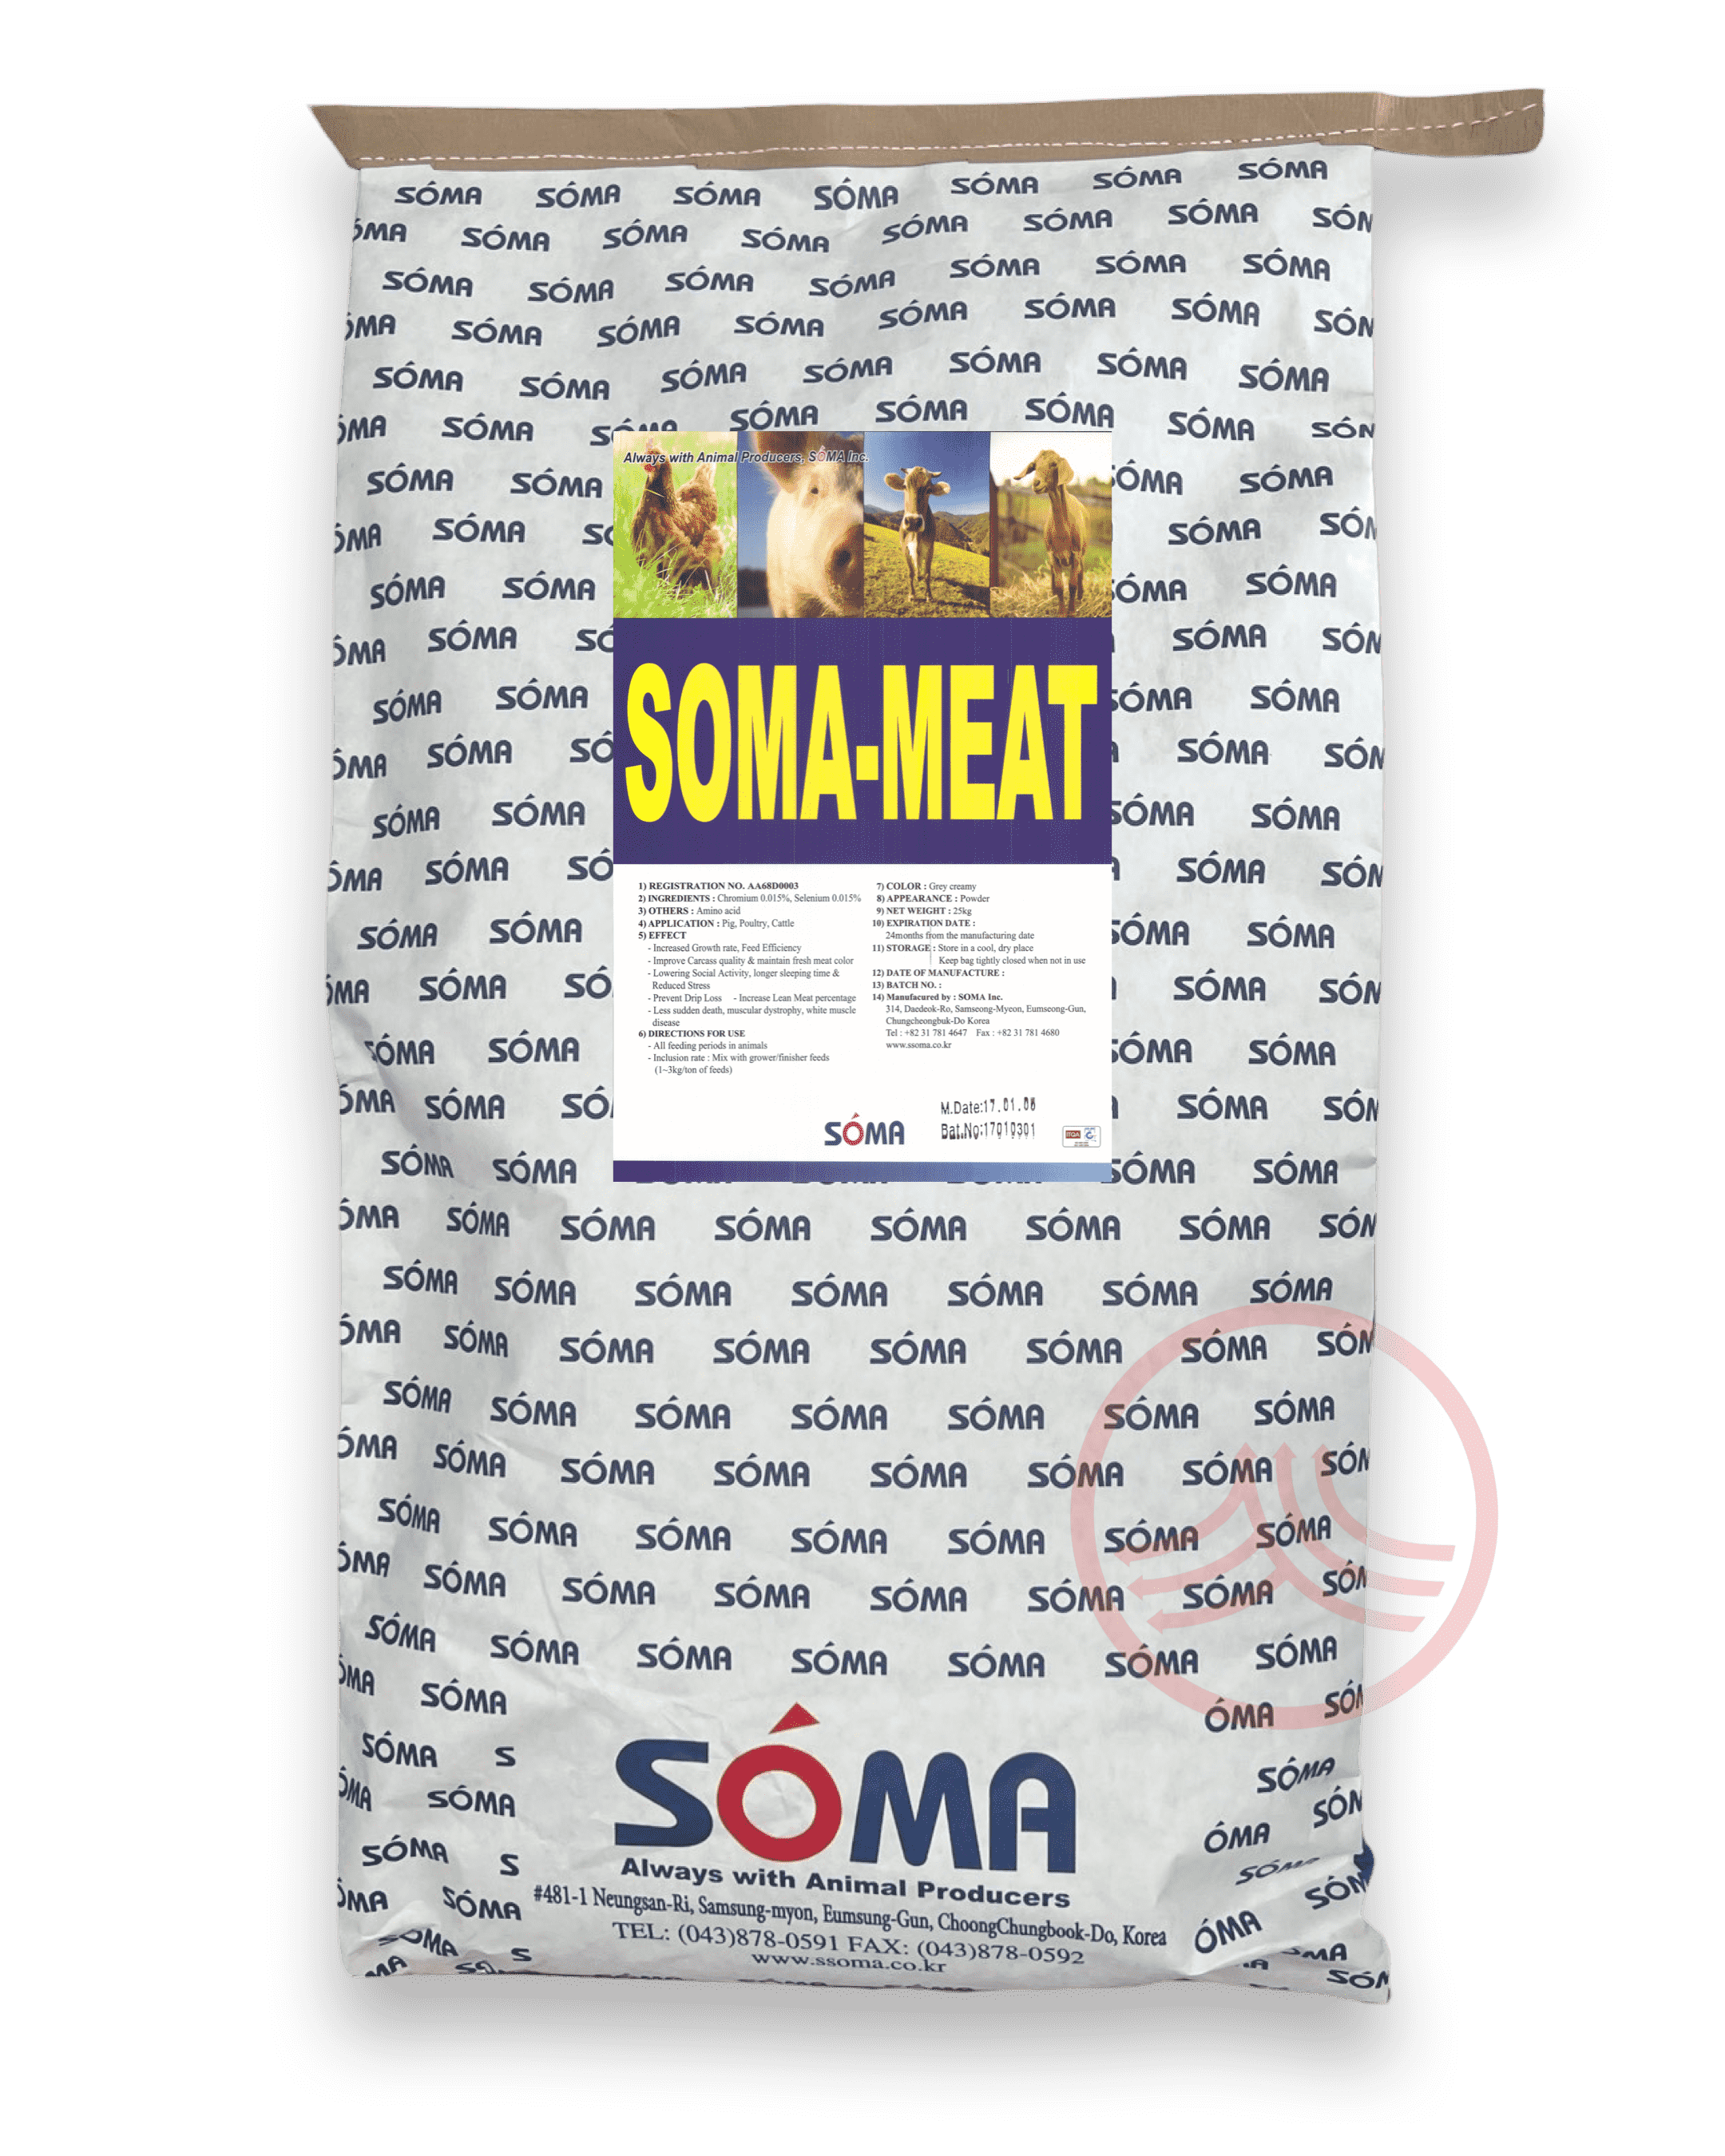 SOMA-MEAT